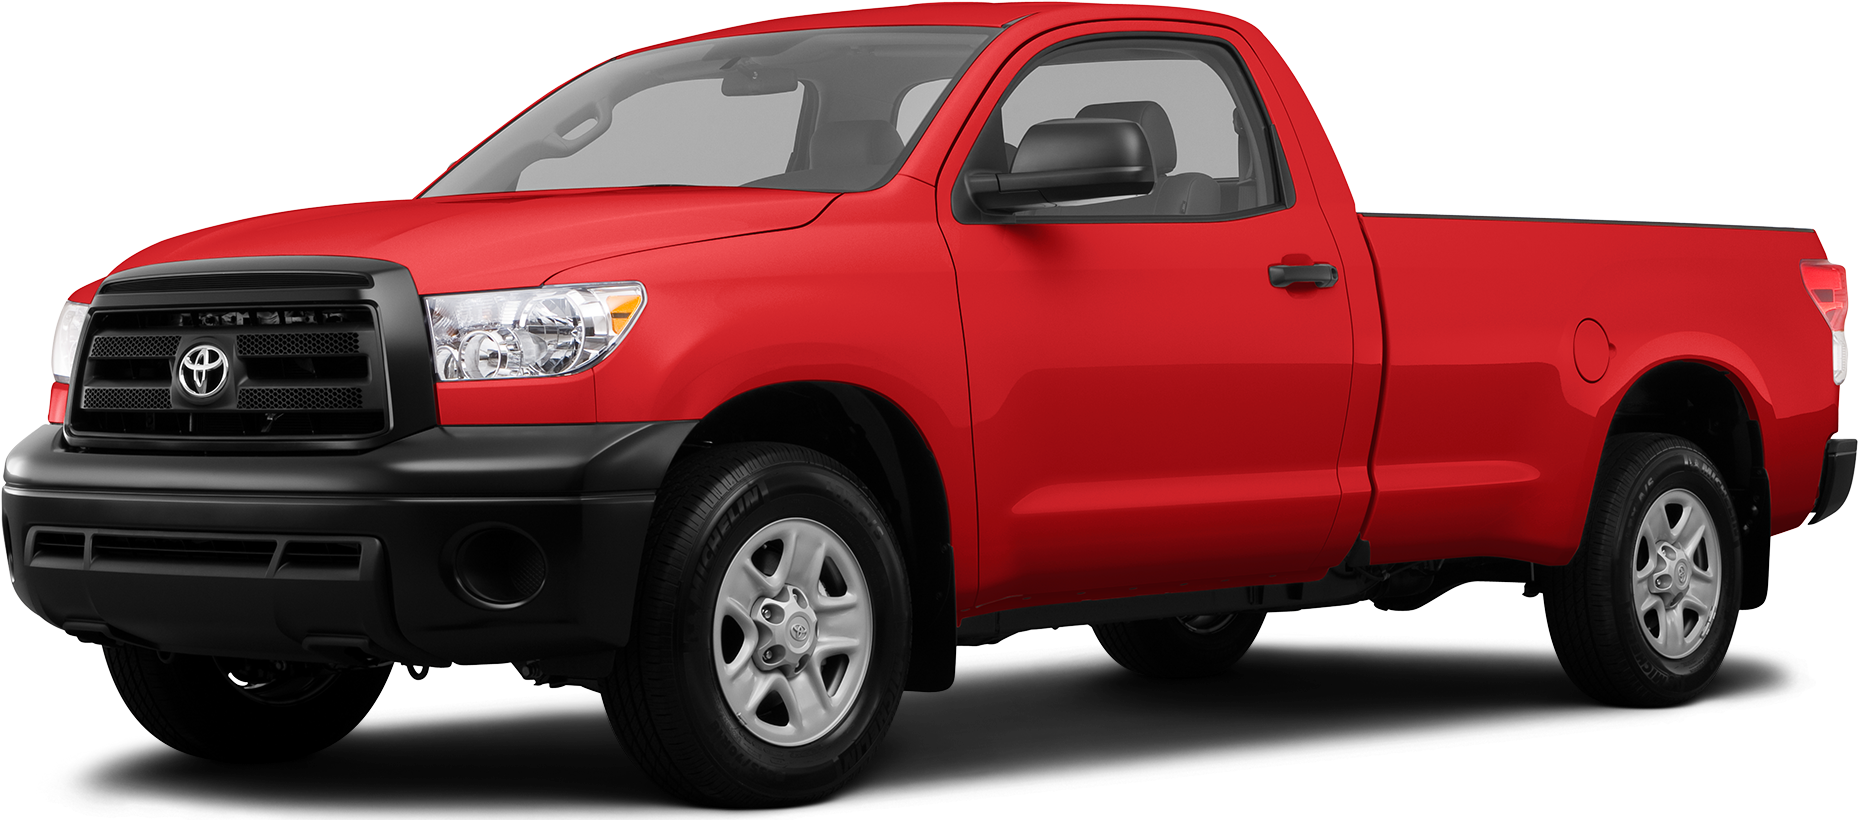 2013 Toyota Tundra Regular Cab Price Value Ratings And Reviews Kelley